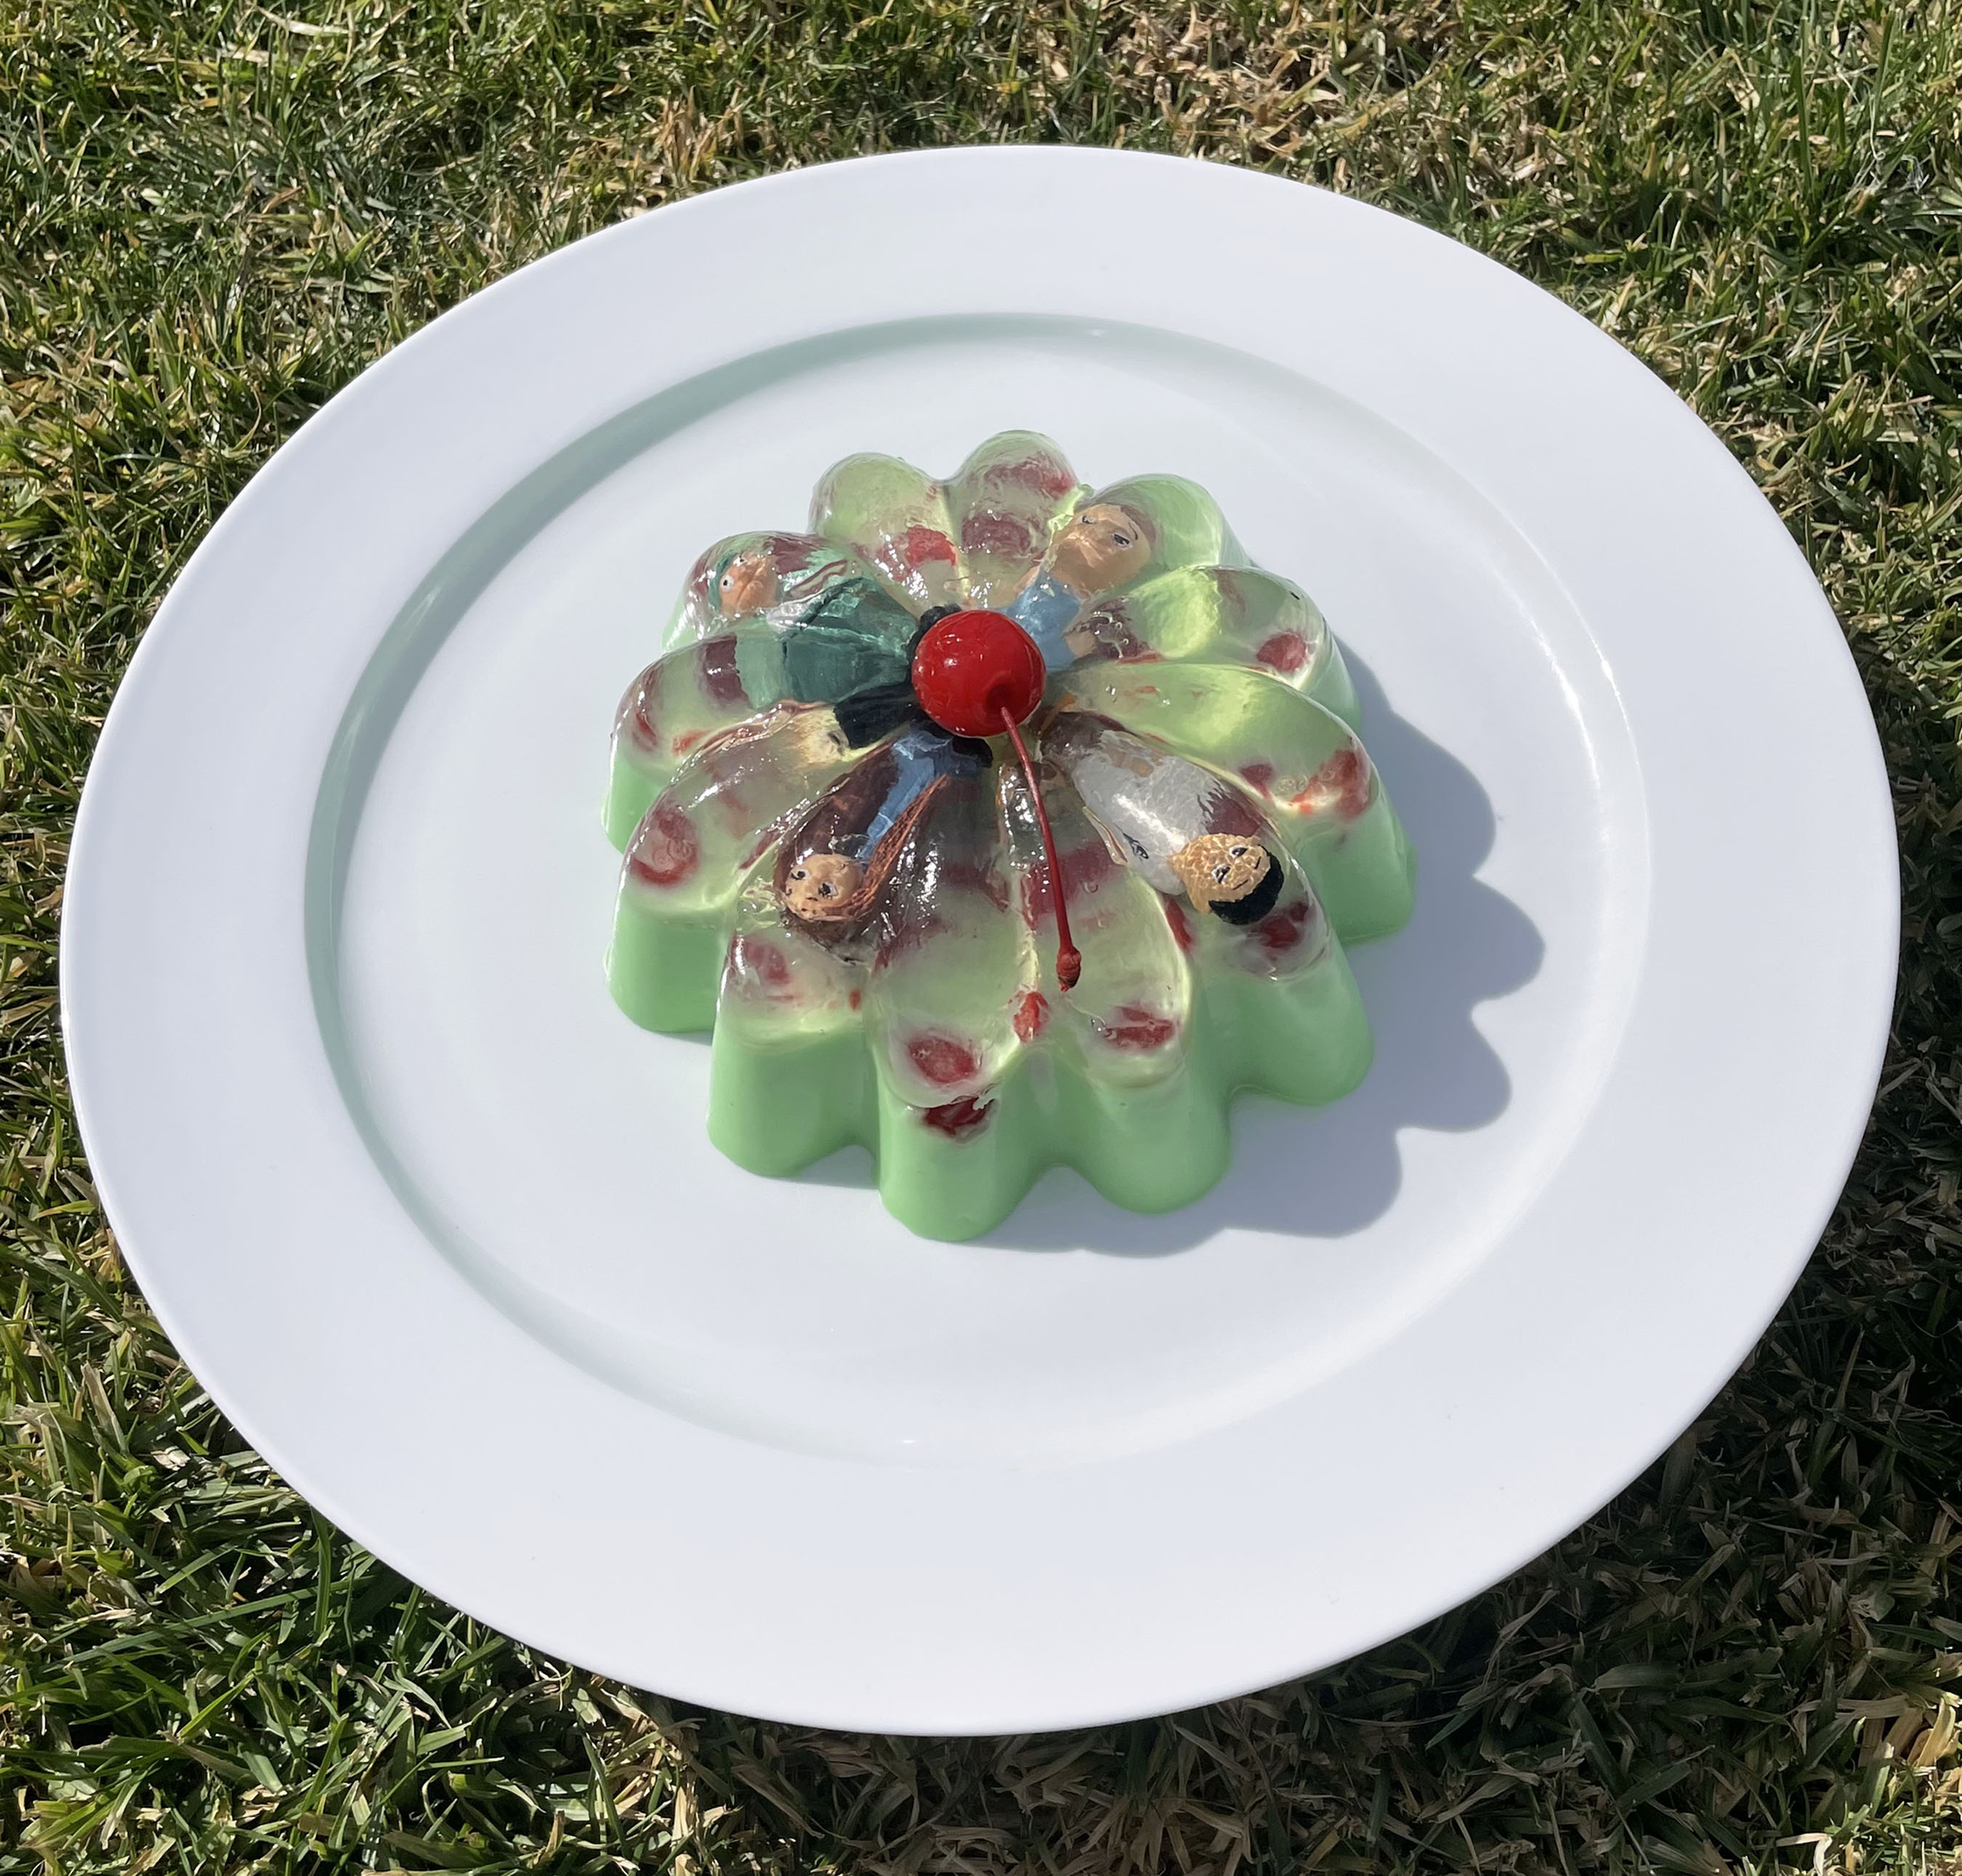 Marissa de la Peña art, green jello mold with four cartoon-like figures encased inside, with a cherry on top. Plated on a white plate with plate resting on green grass.